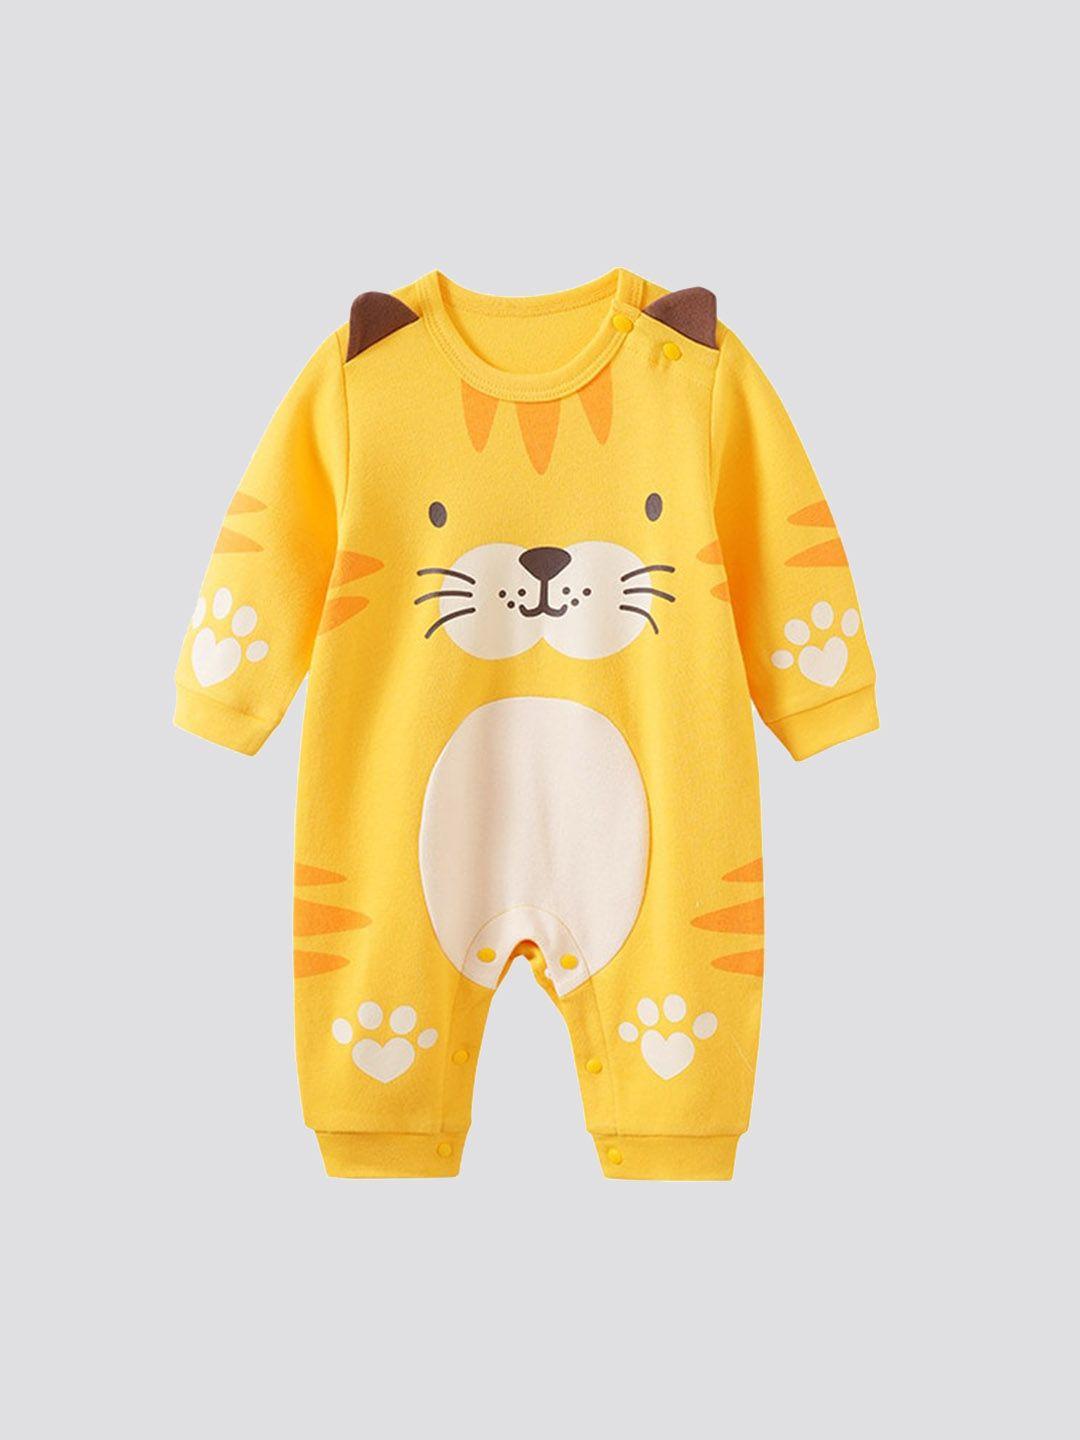 stylecast infant boys yellow printed cotton romper